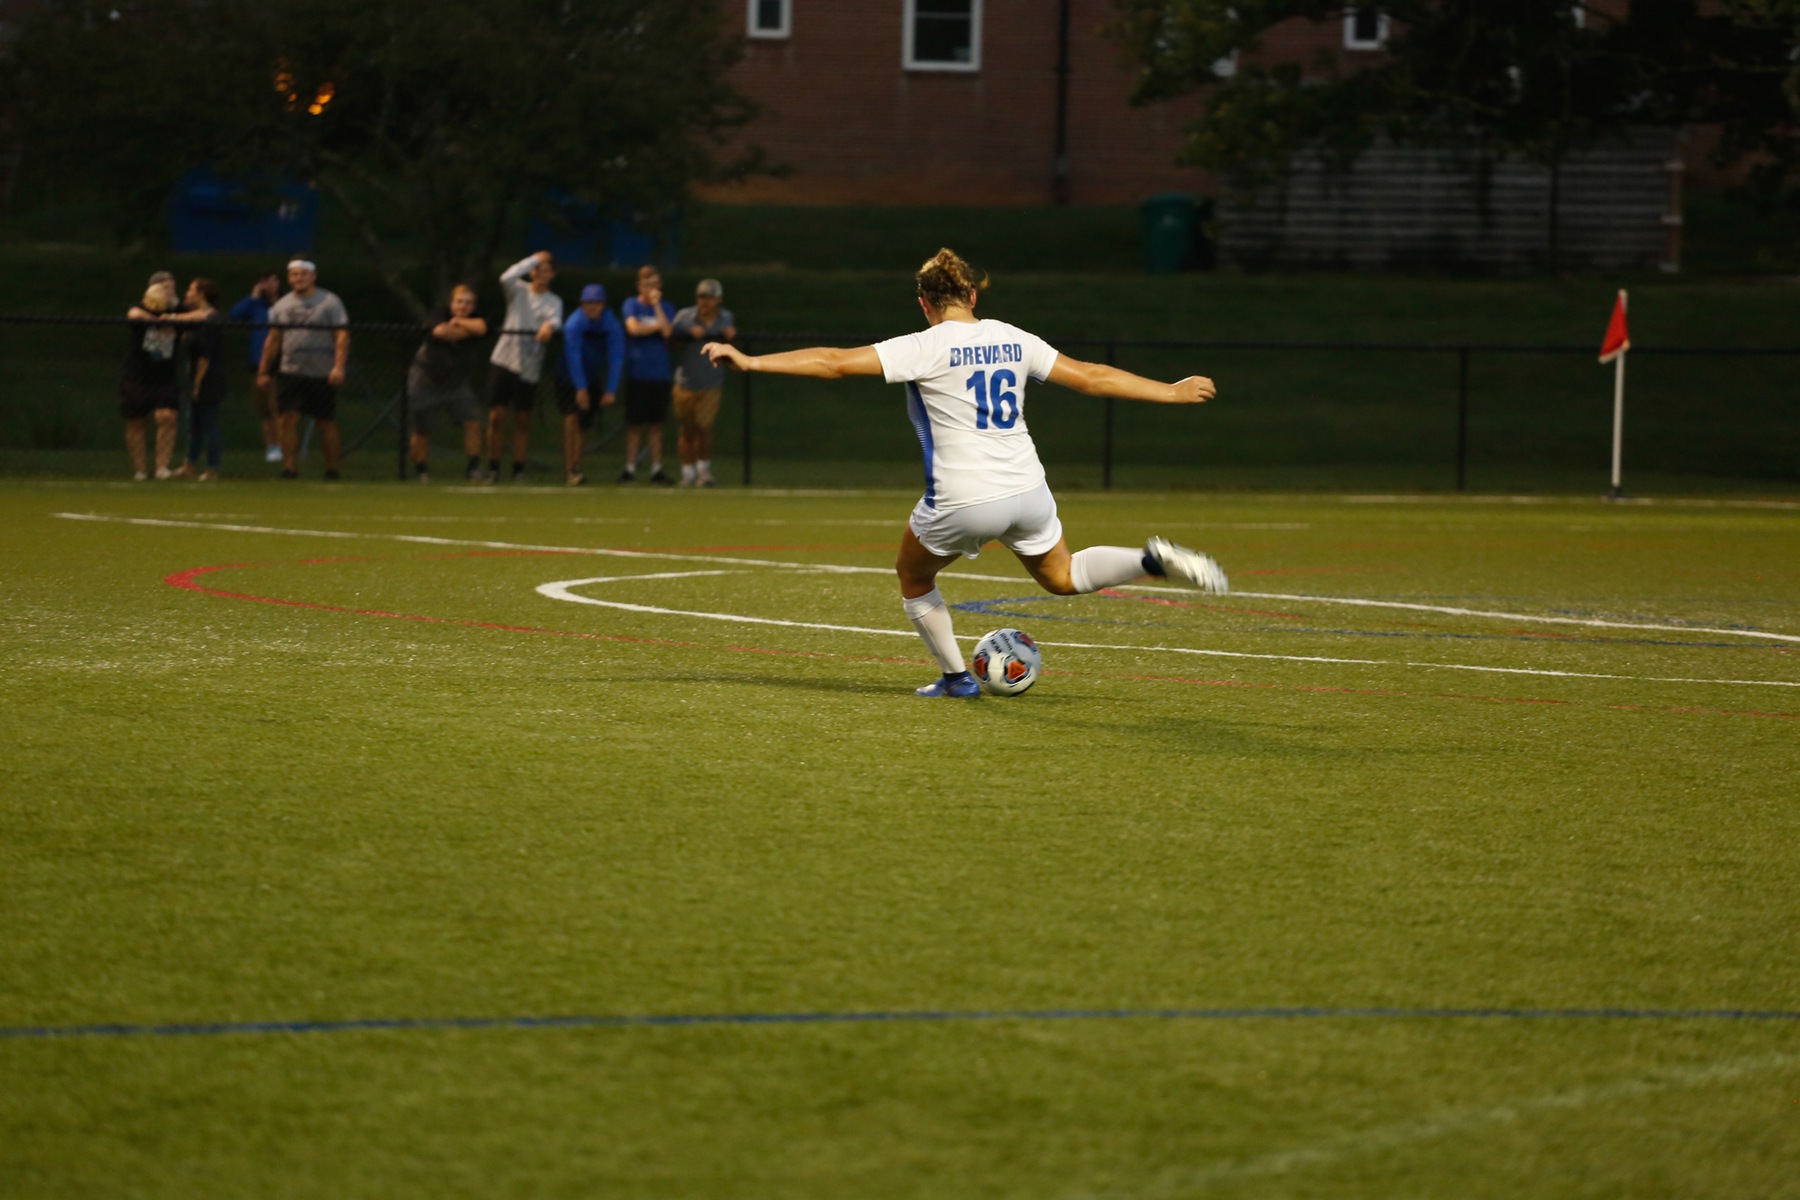 Emma White sends the ball deep for the Tornados (Courtesy of Victoria Brayman '22).